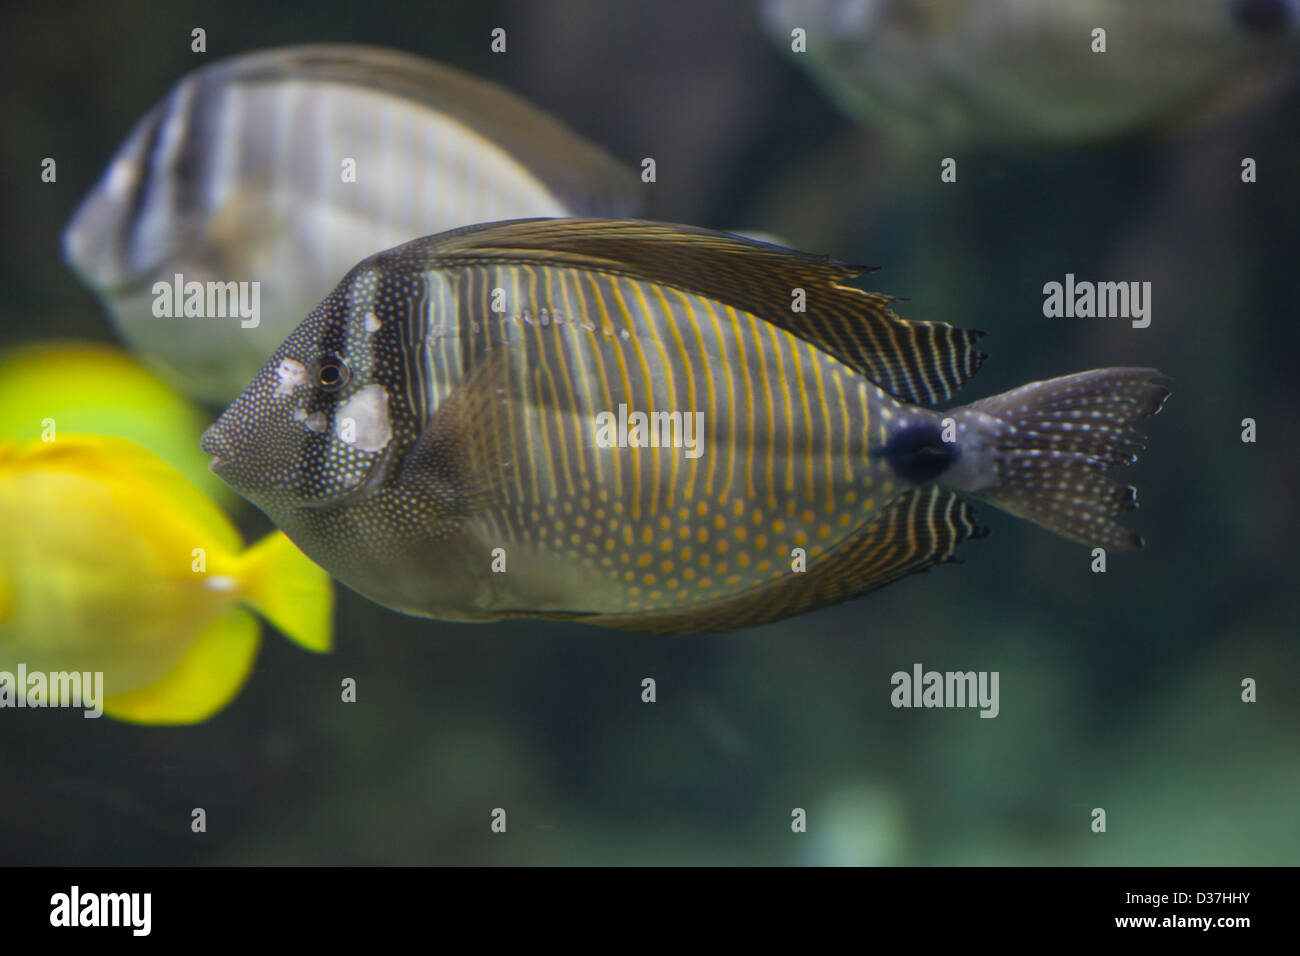 Desjardini tang with marked face, Stock Photo